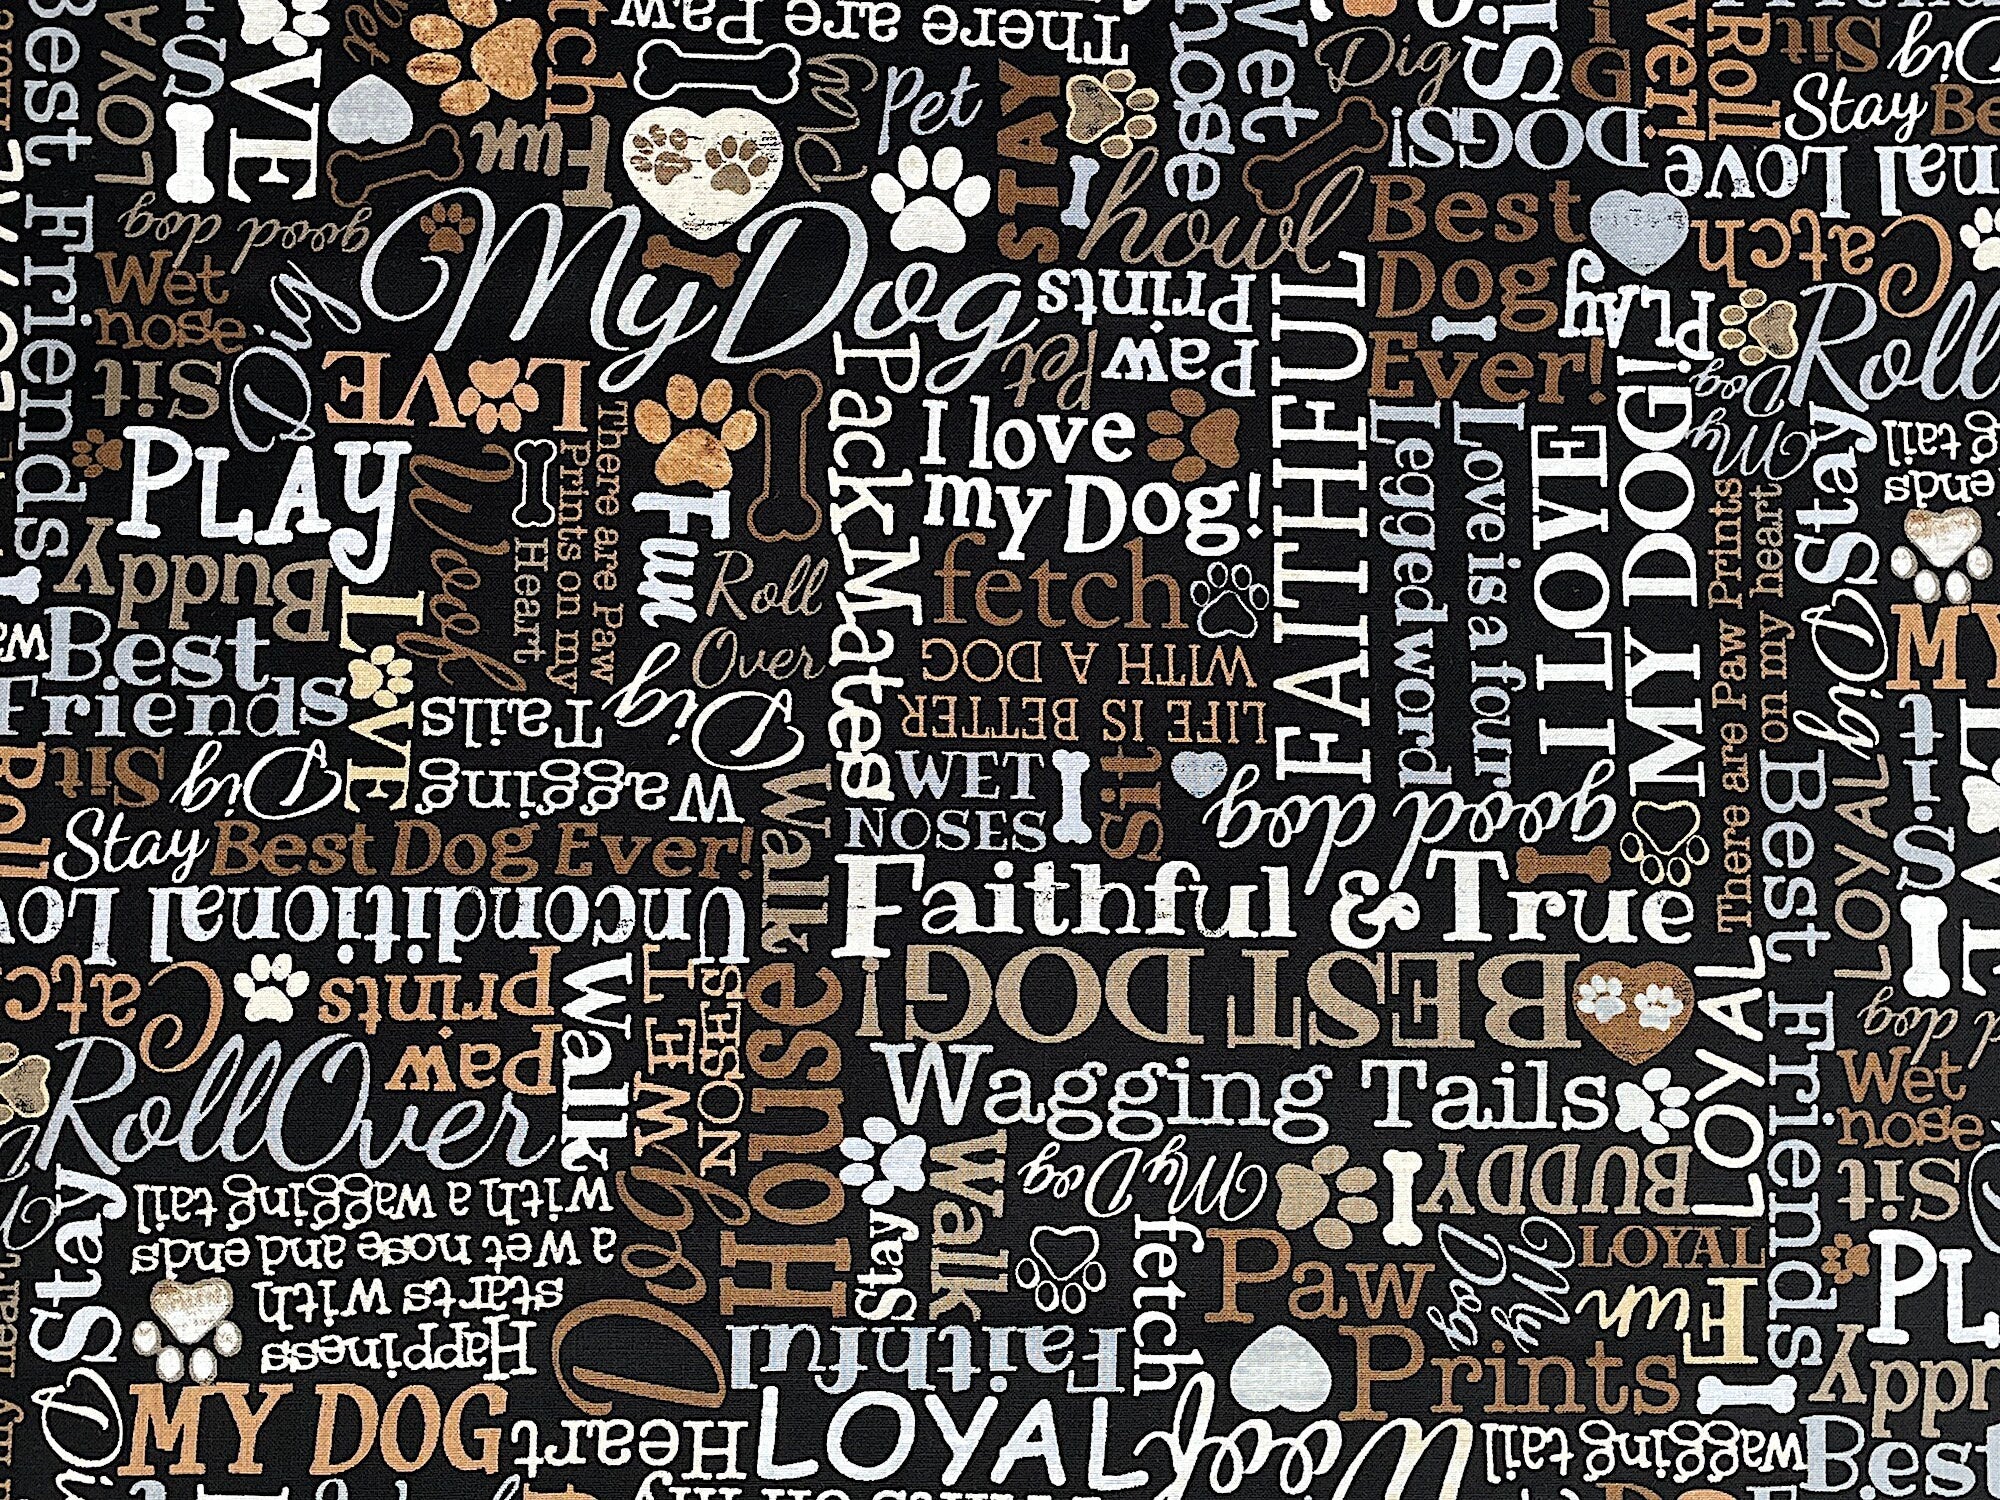 Cotton fabric covered with dog sayings such as life is better with a dog, love, play, buddy, best friends and more.